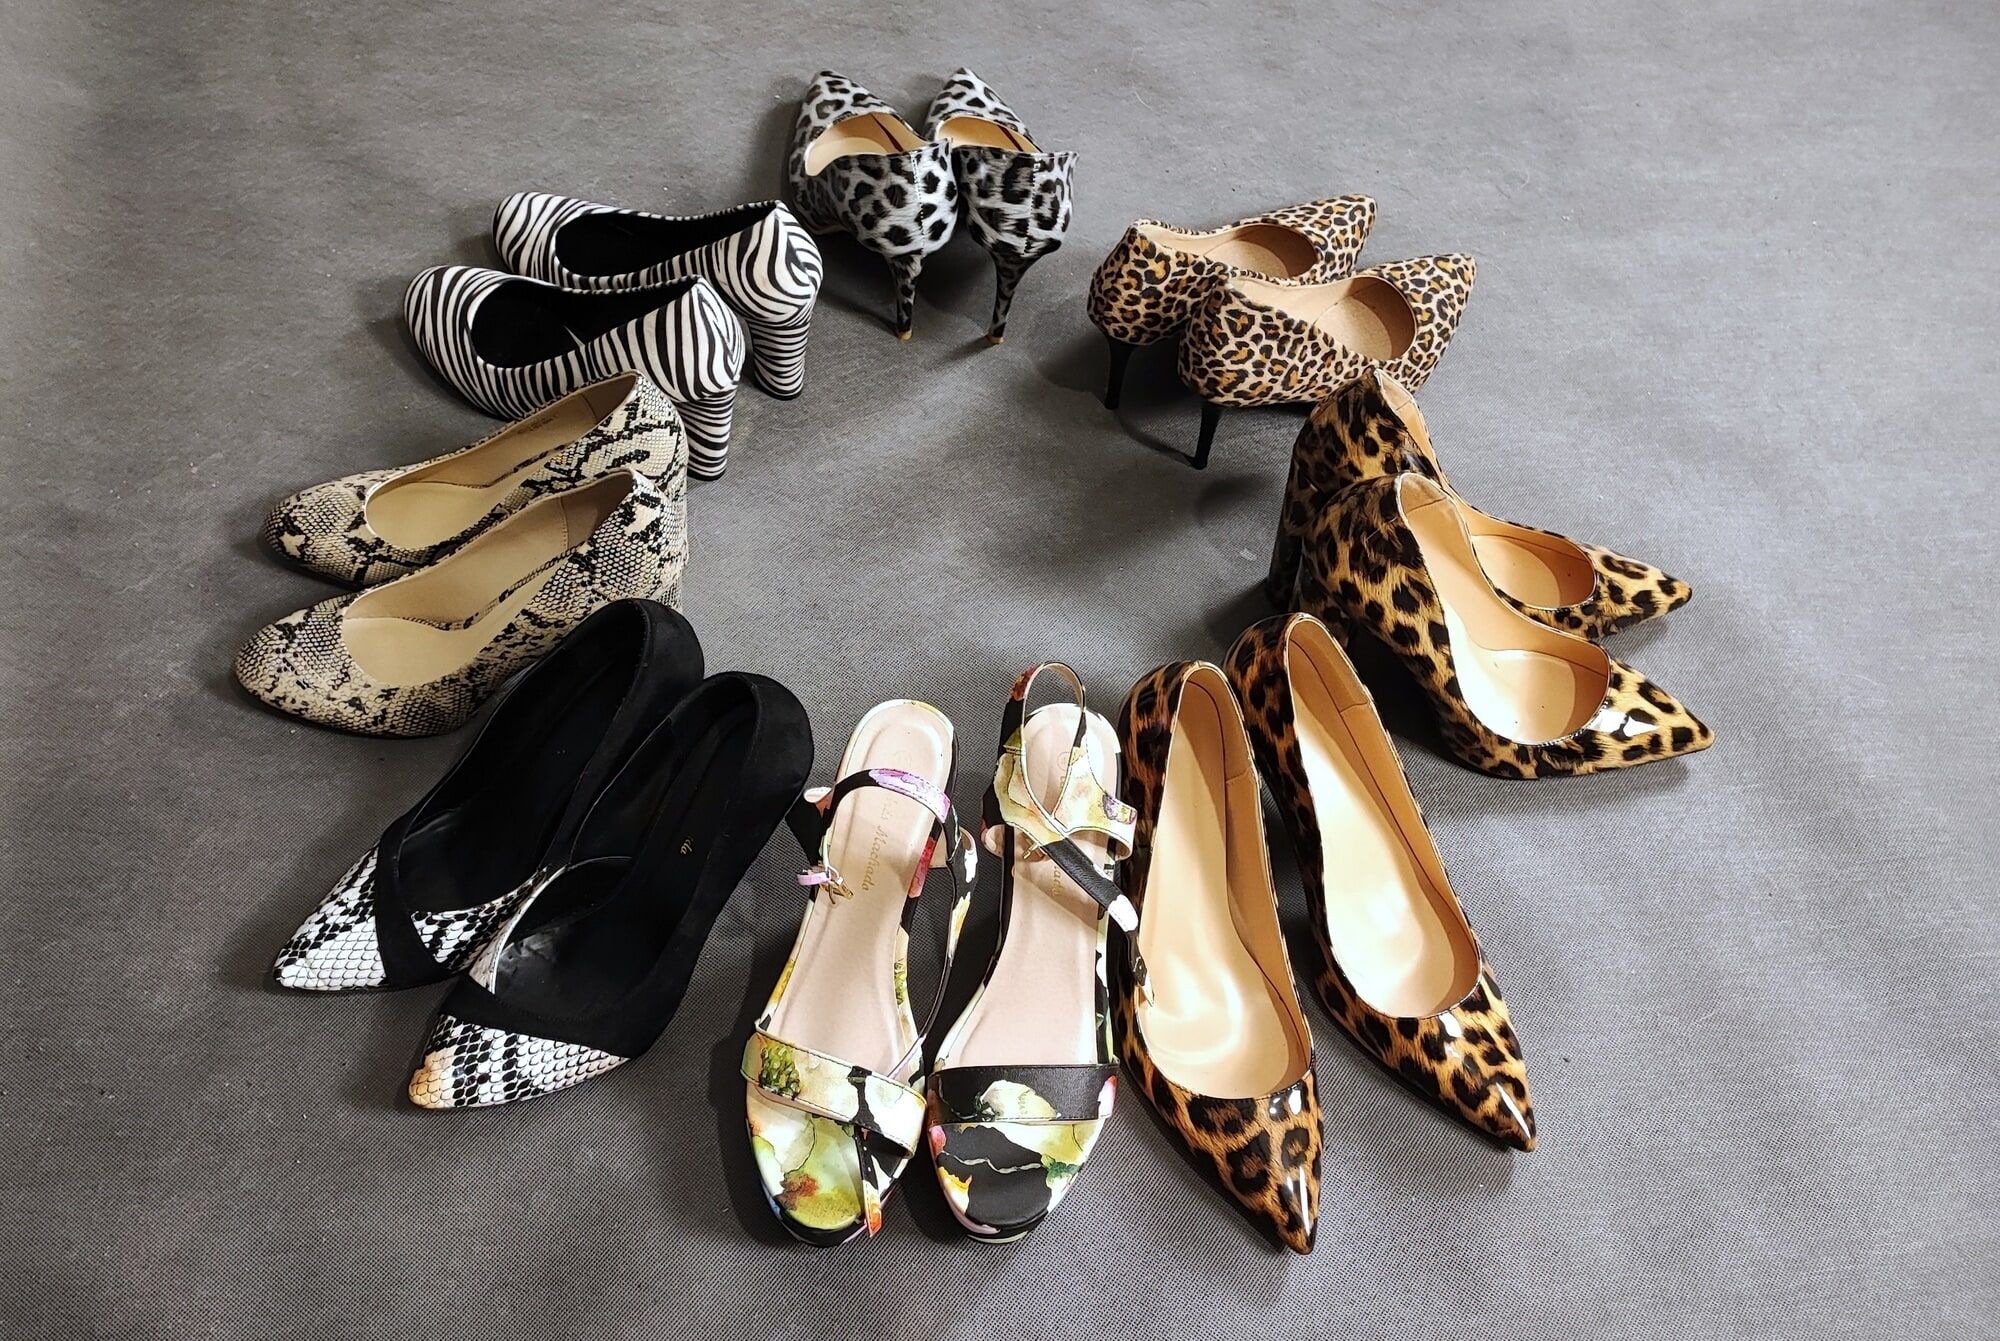 My actual shoes collecton #20